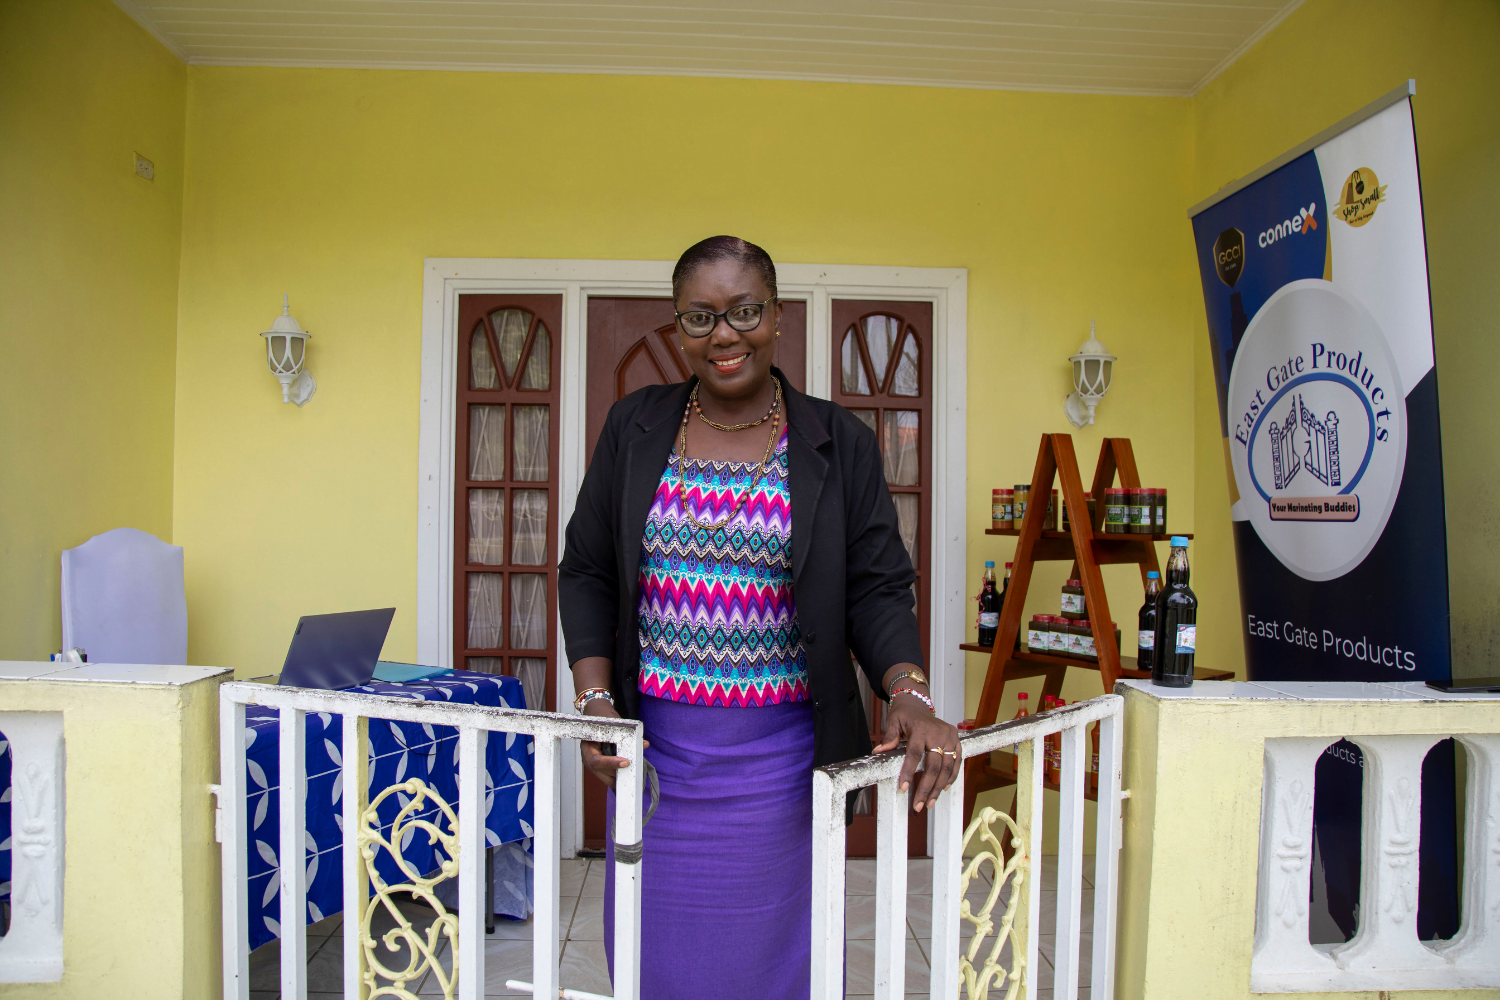 A Guyanese woman entrepreneur, Stacy Reece, stands behind a white, hip-height metal gate. Behind her is a yellow building with an open porch. On the porch is a desk with a laptop, a sign that says East Gate Products and Café and a wooden shelf with marinating sauces on it. She is wearing a top with a pink, blue and purple chevron pattern under a black blazer and a purple skirt.